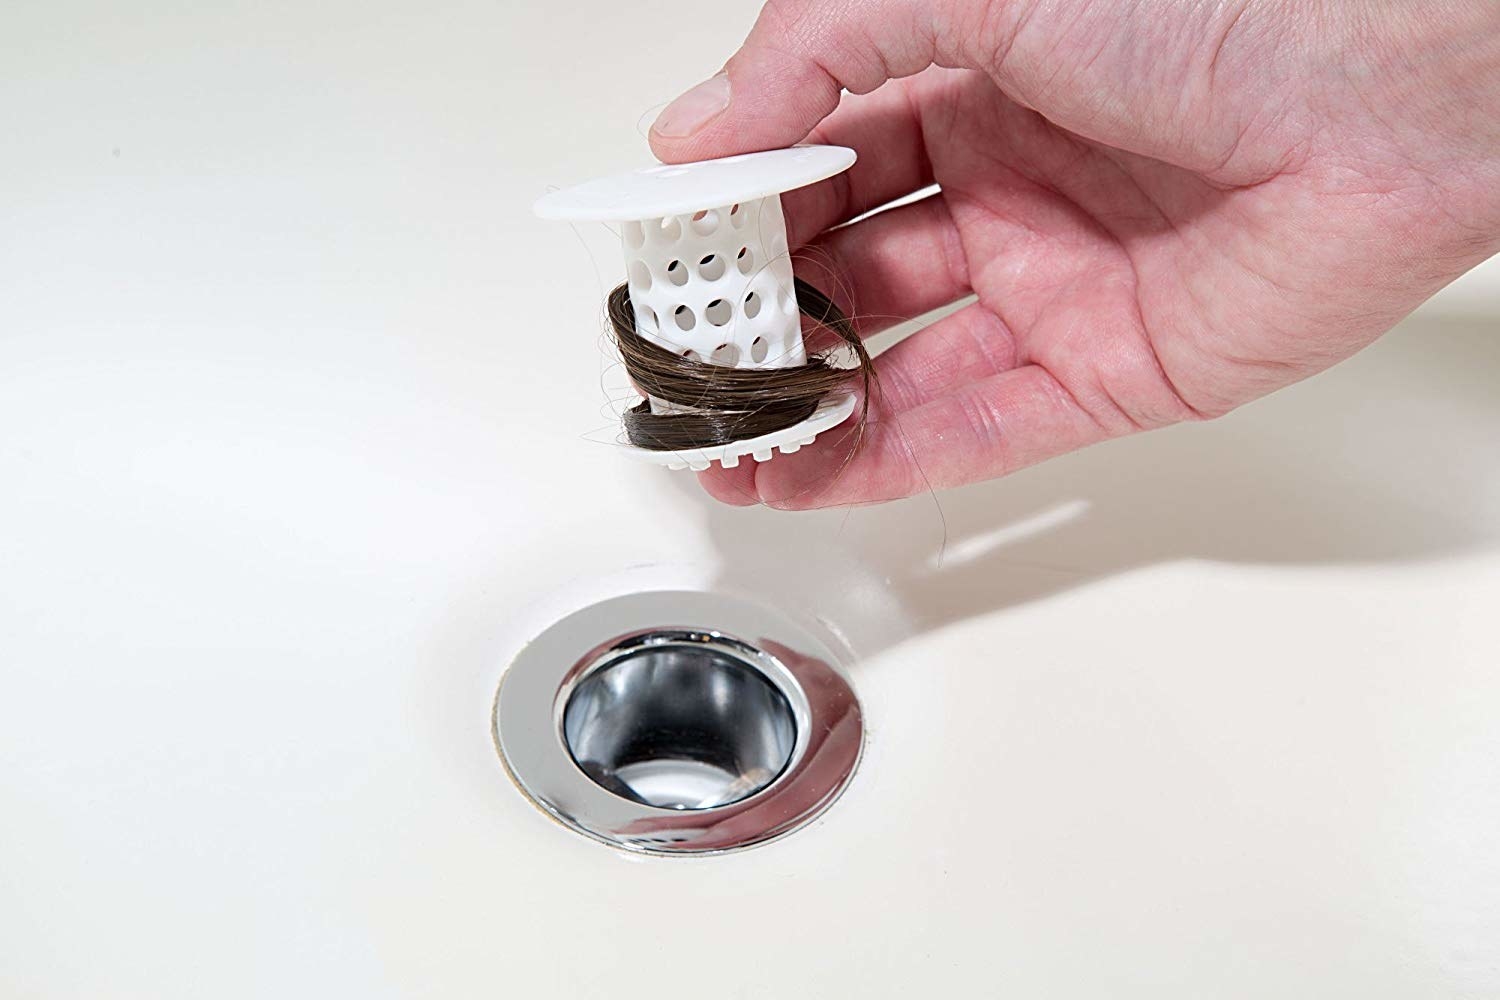 mushroom shaped device that collects hair from drain